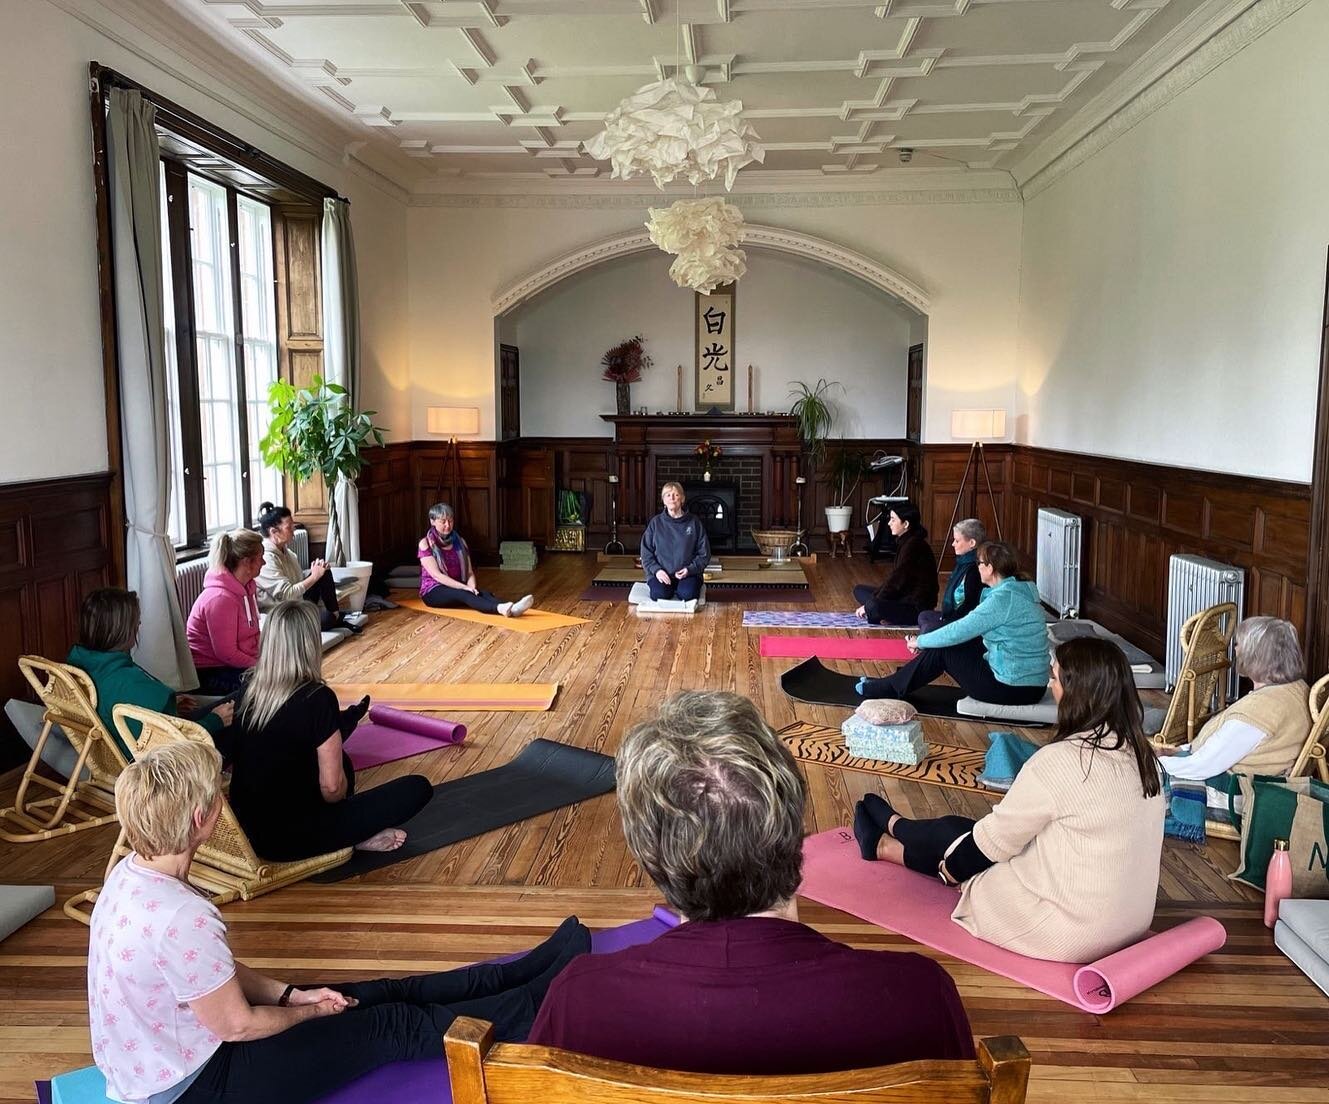 Allanton Women&rsquo;s Well-being Day 
- A day for some well deserved self care - 

We supported each other in a safe, relaxed and comfortable space, relieving stress and looking after our physical, mental, emotional and spiritual health and well bei